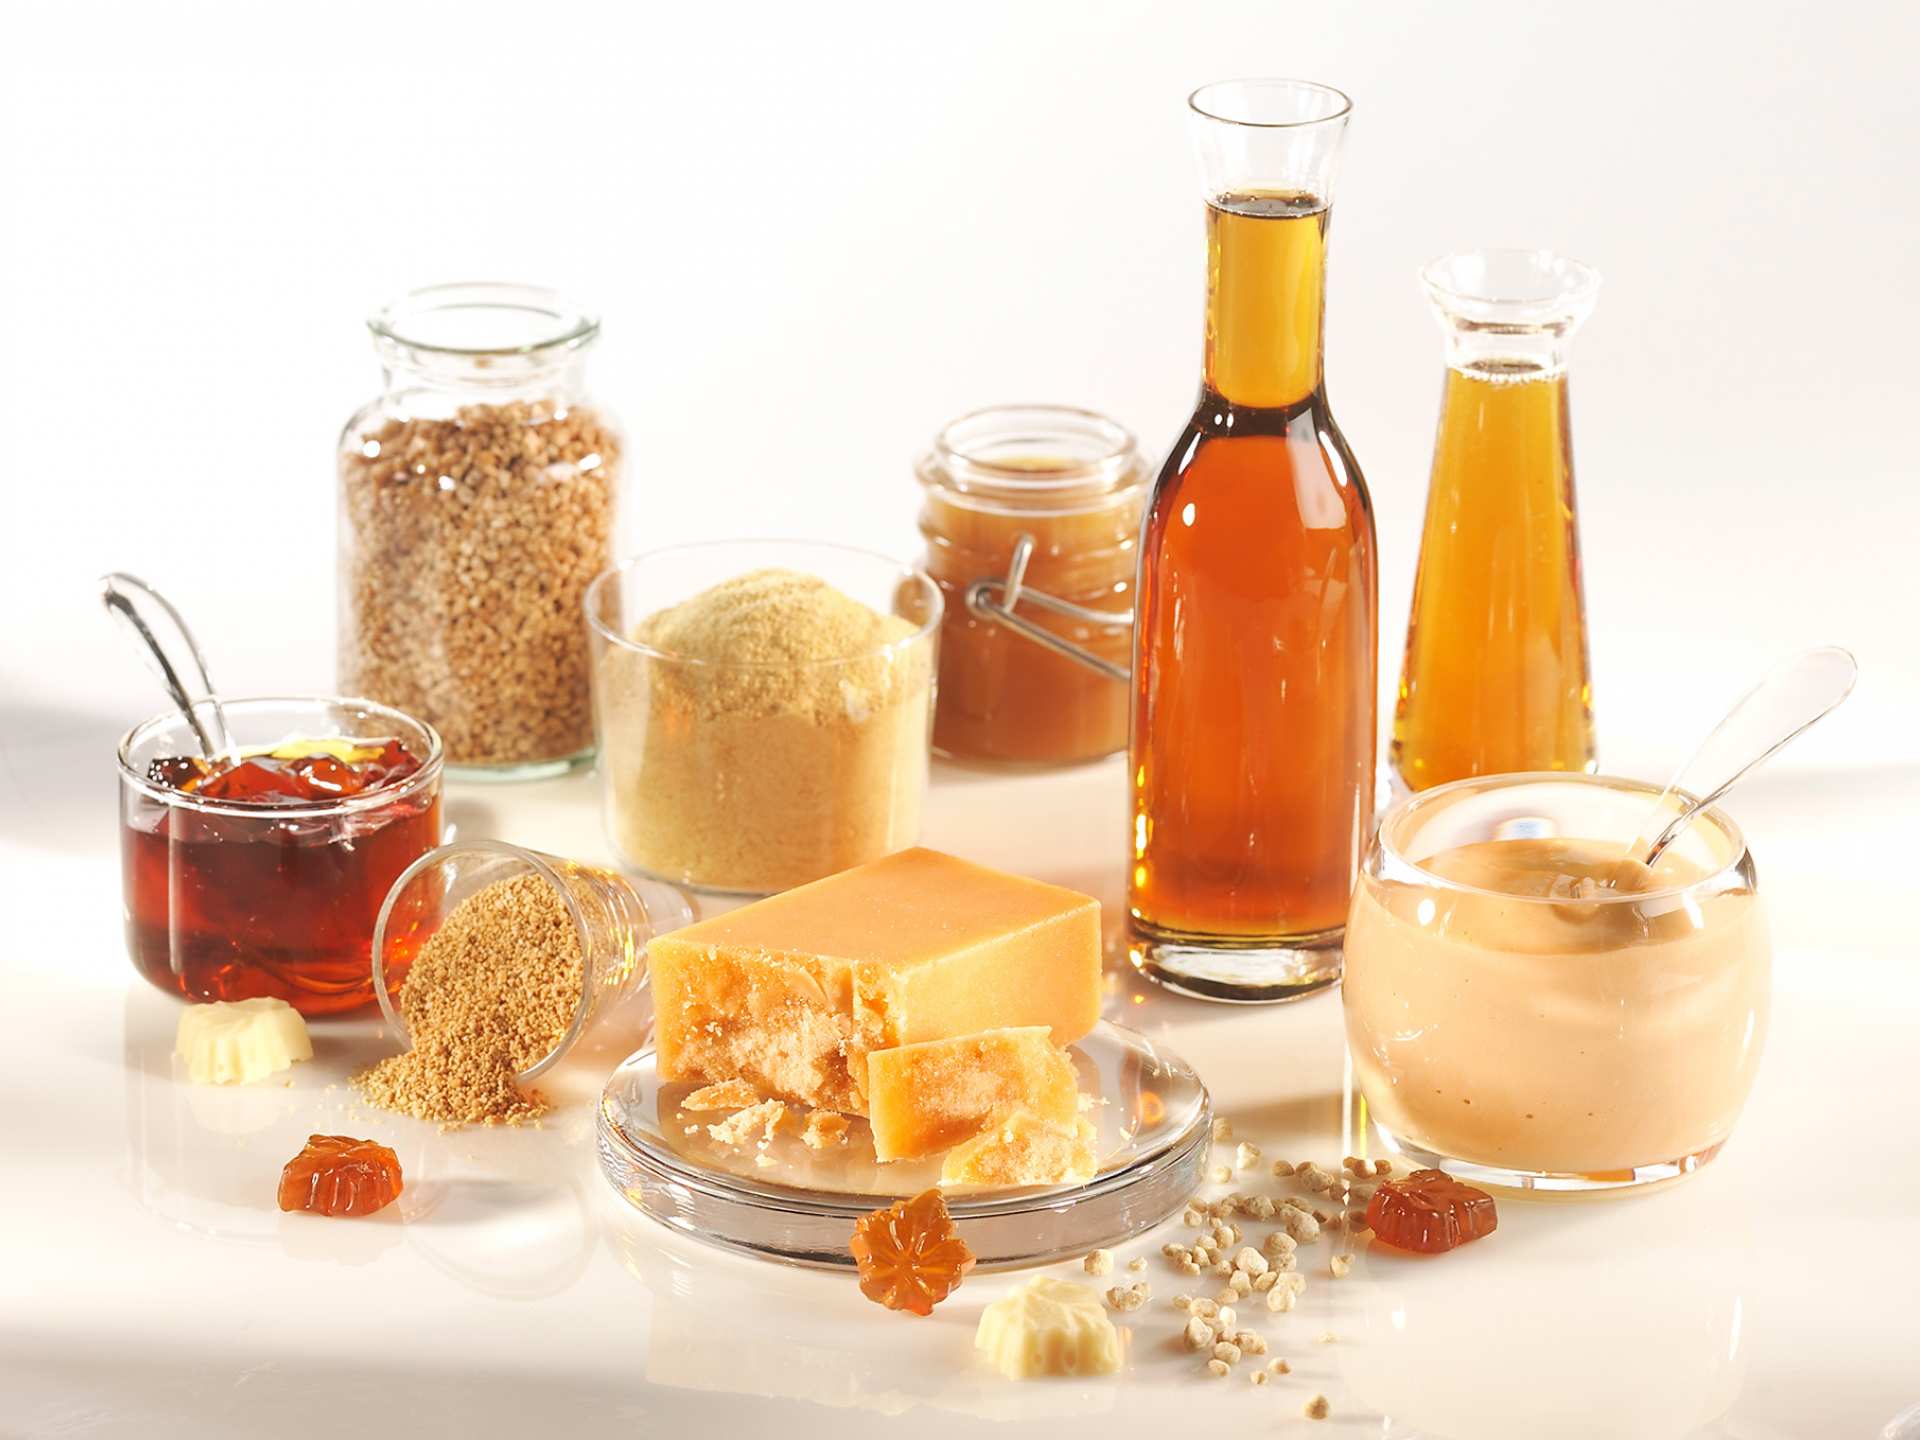 An assortment of different maple from Canada products